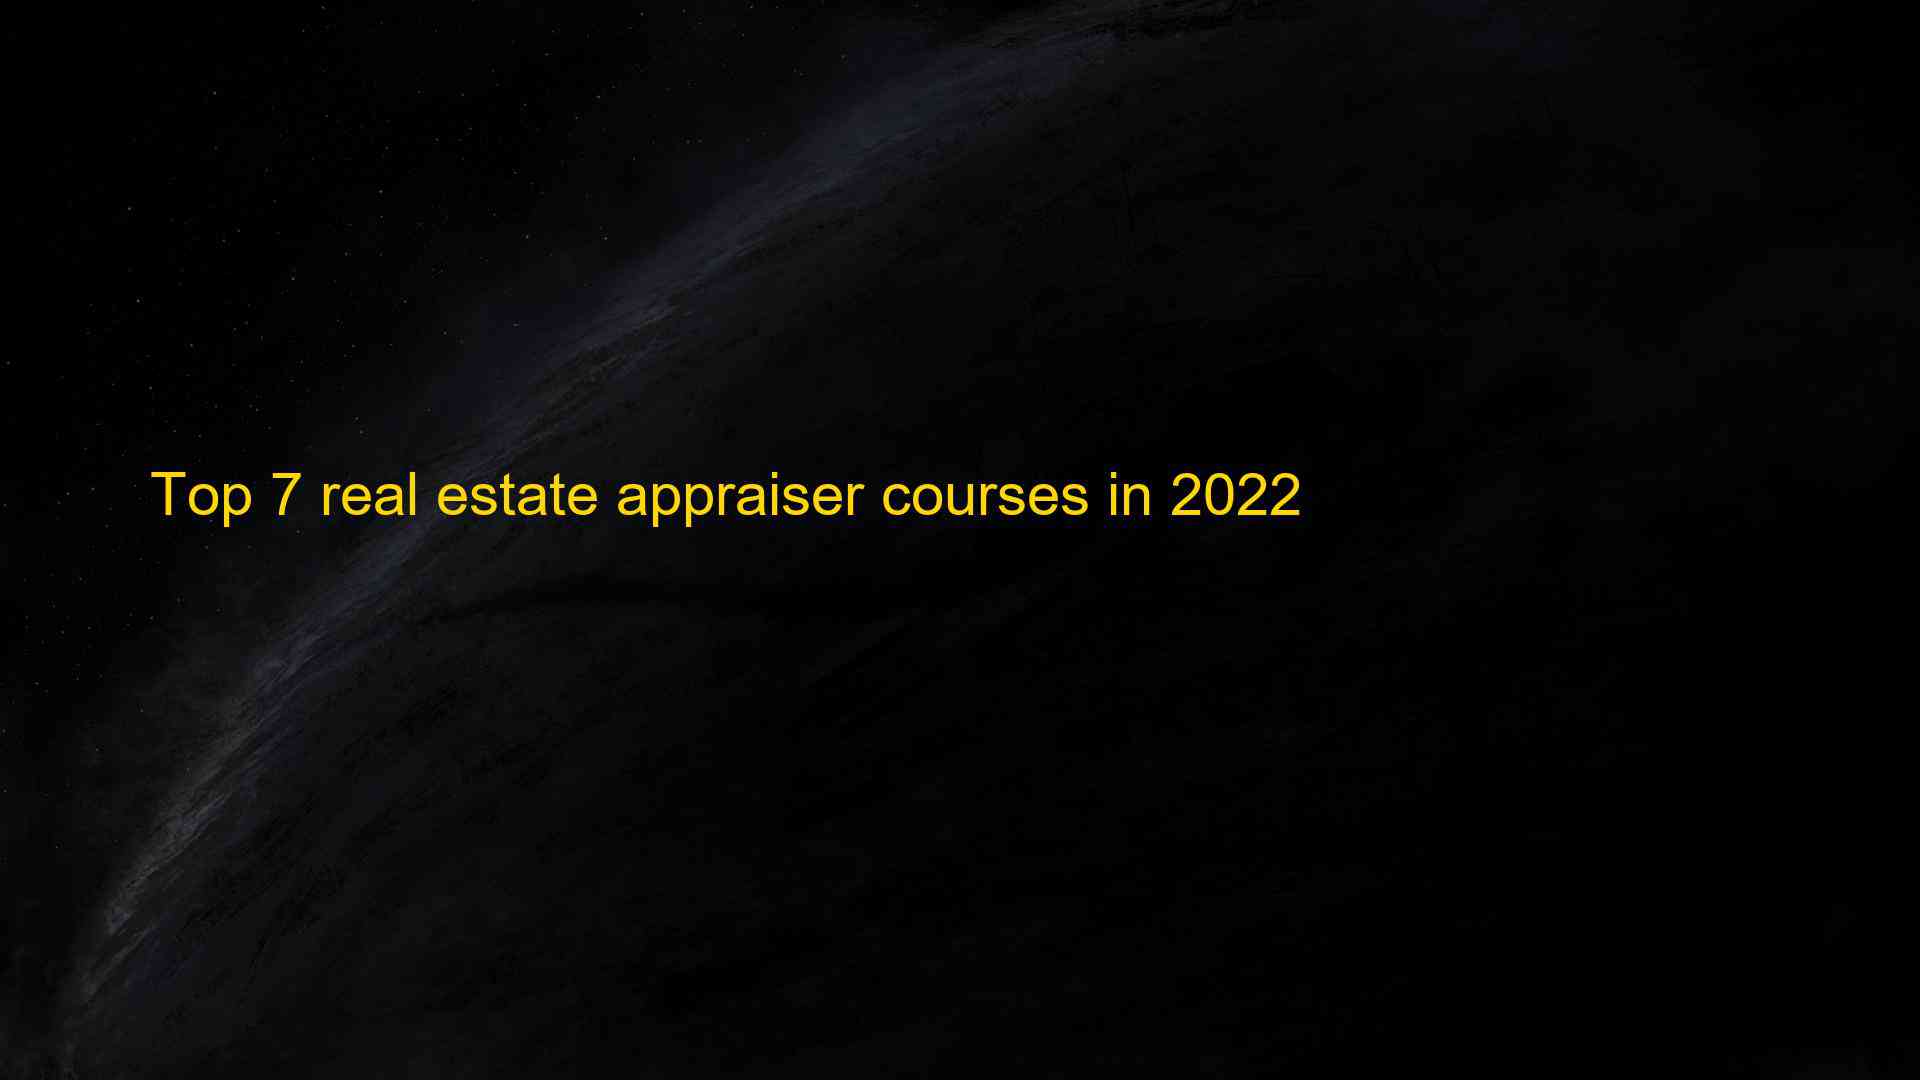 Top 7 real estate appraiser courses in 2022 1660955075